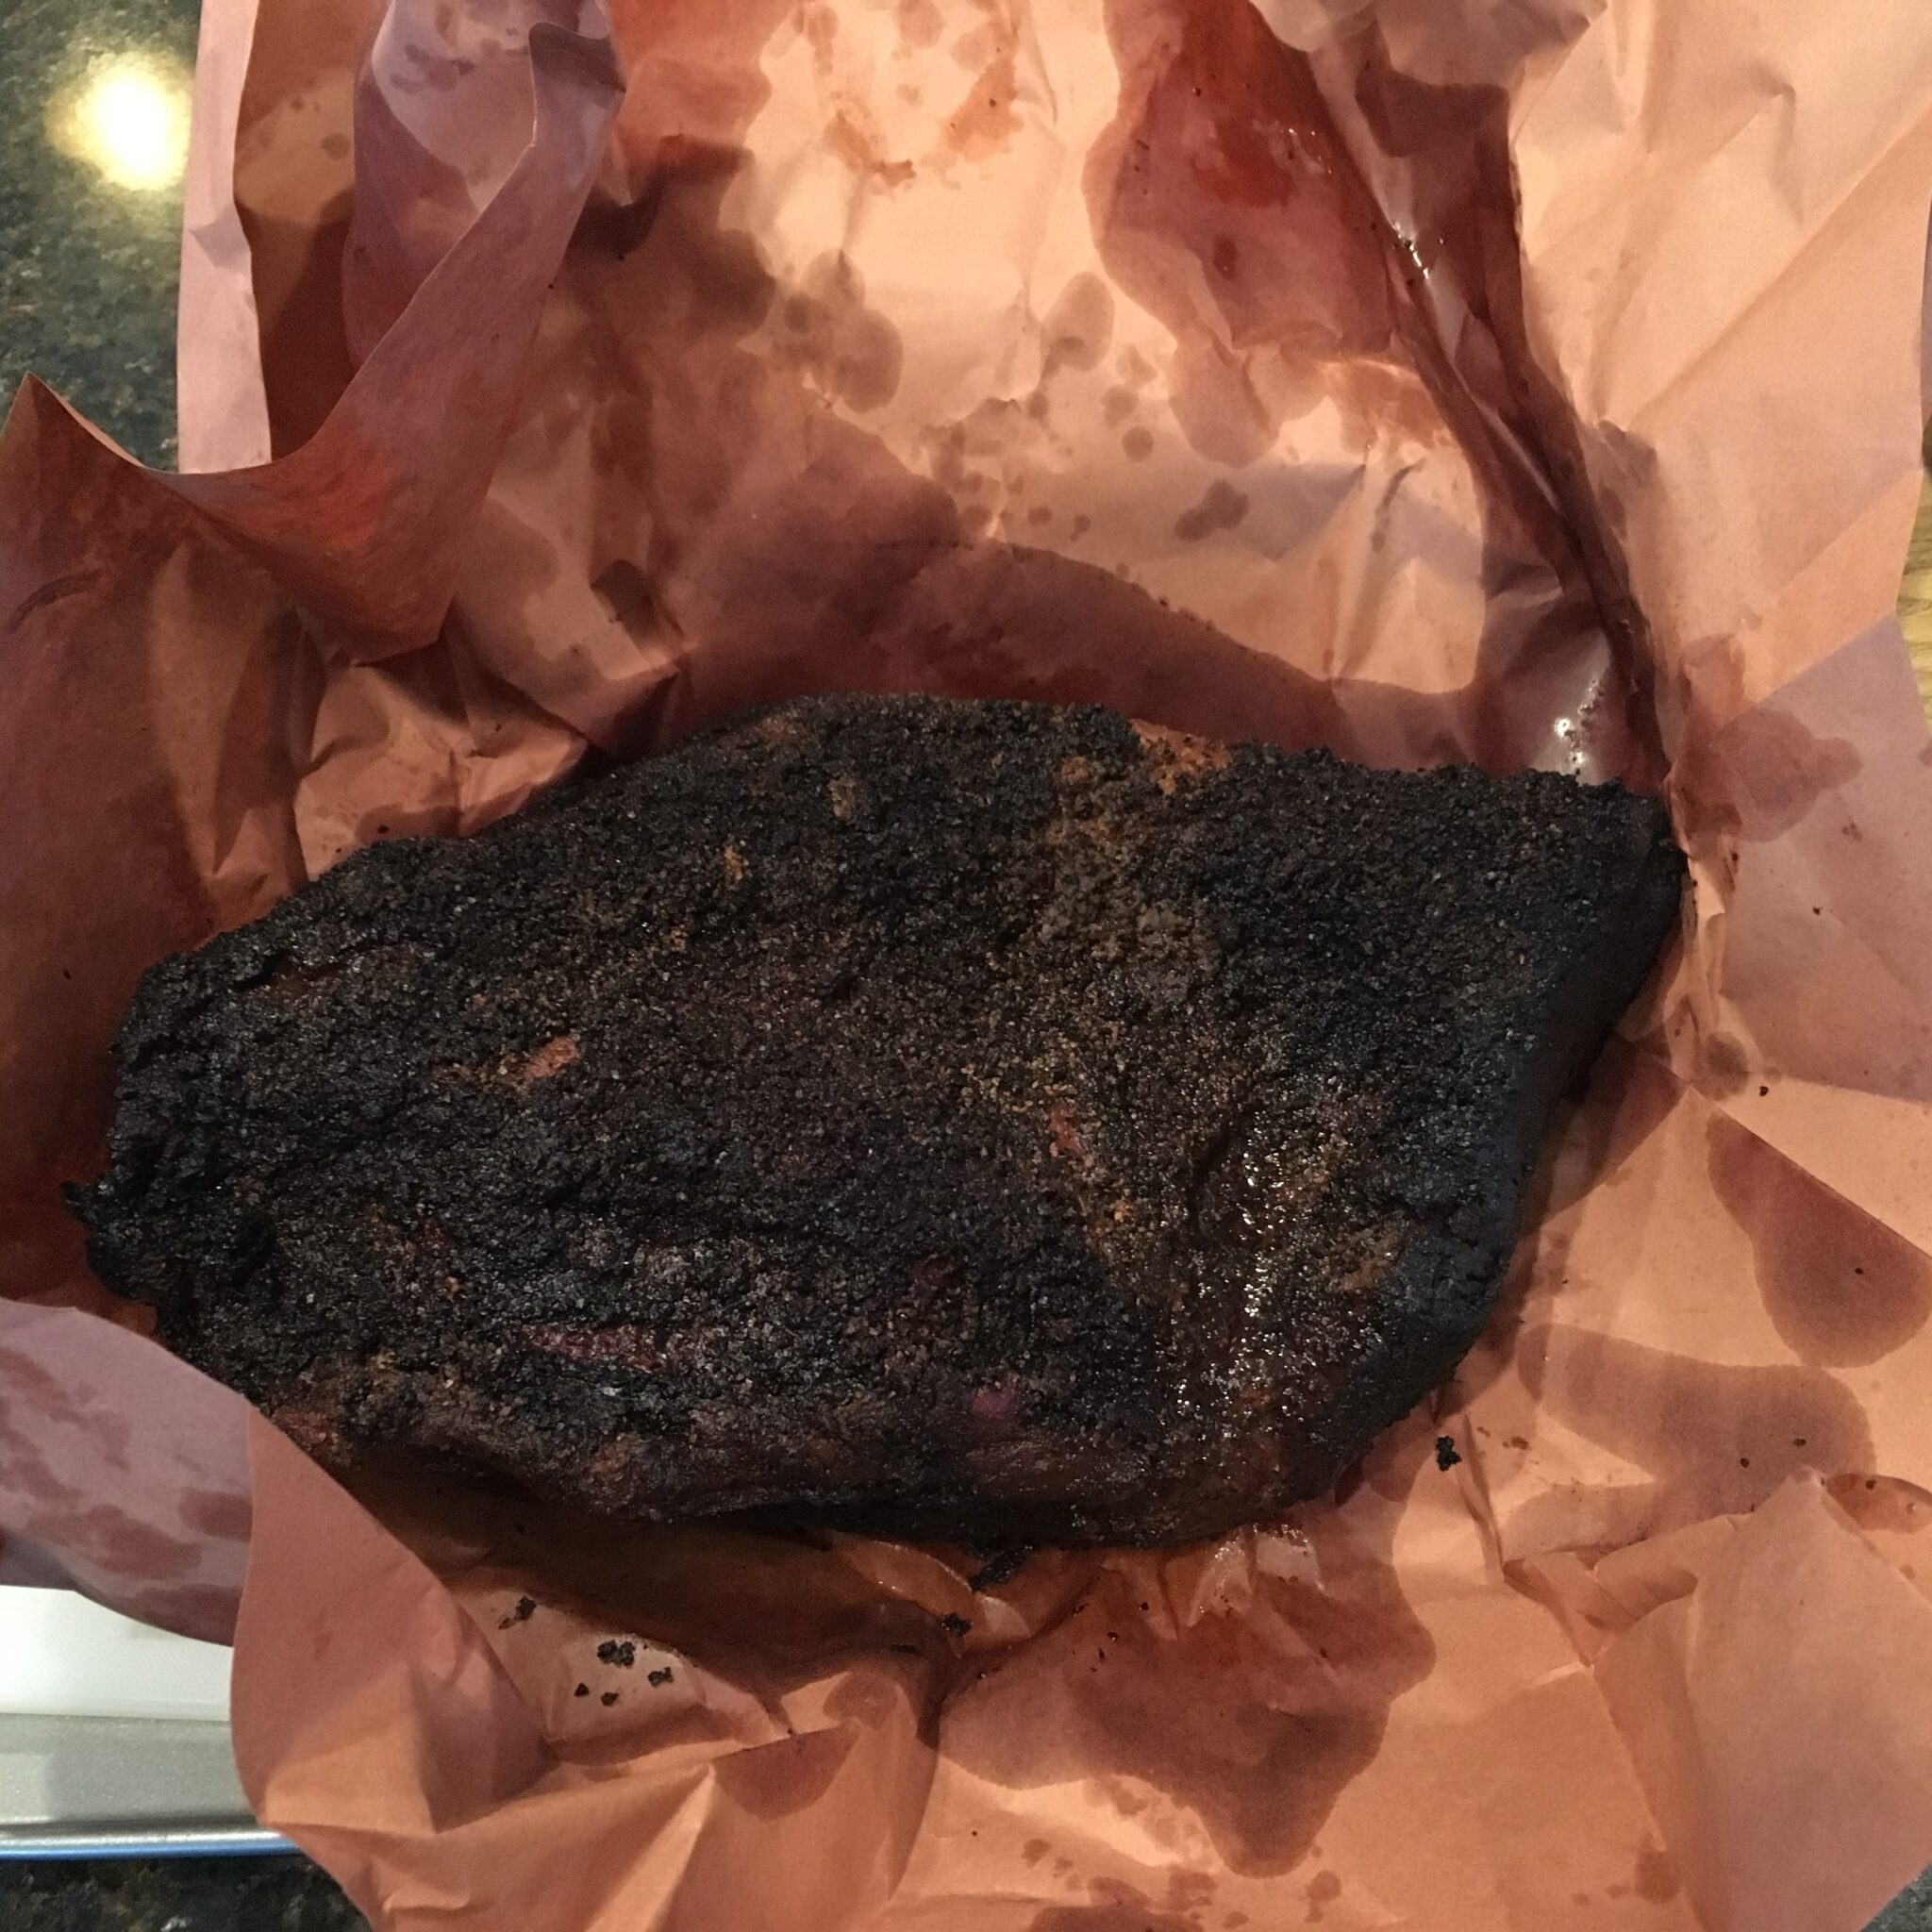 Buying Brisket at Costco? Here’s what you need to know